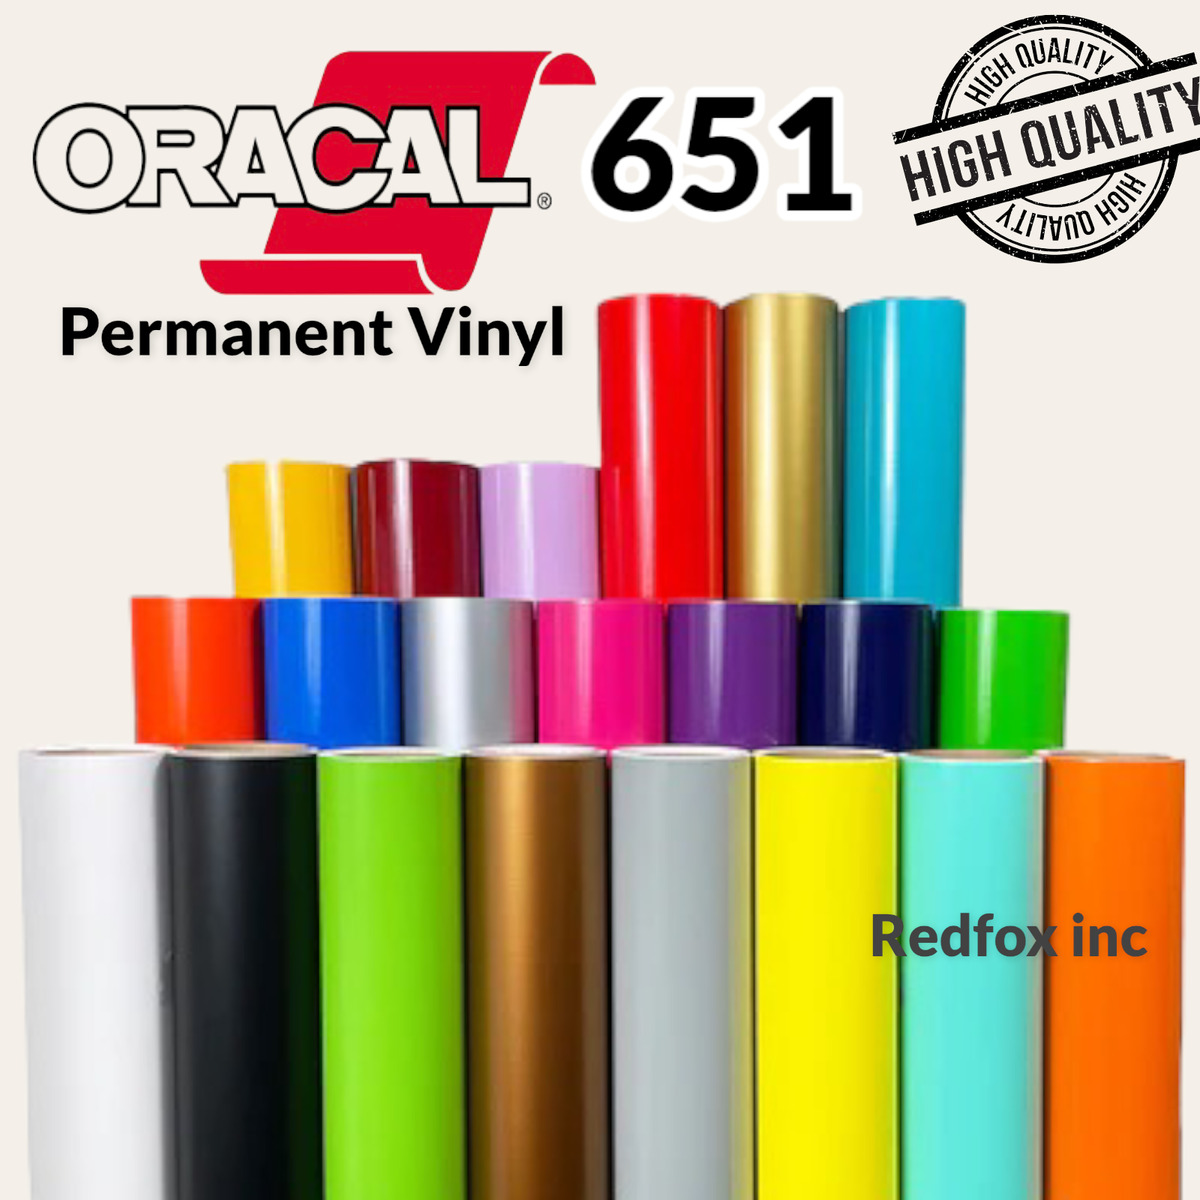 Oracal 651 Permanent Vinyl Decals Lettering Graphics Self-Adhesive 24 x 50  feet